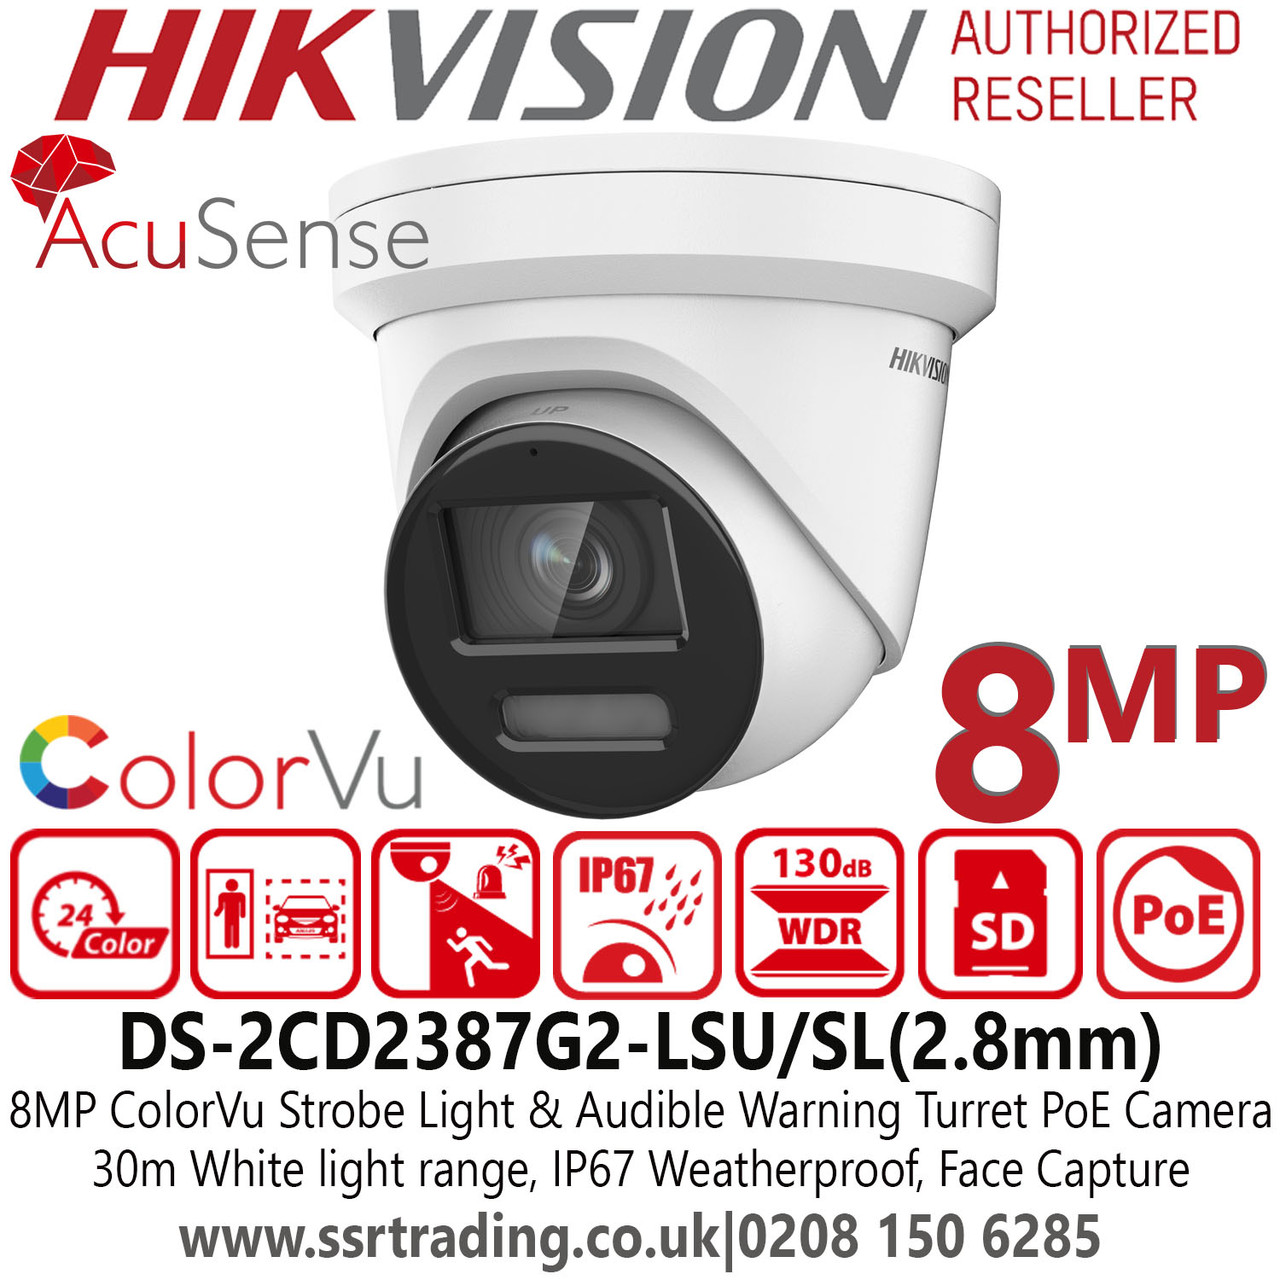 Hikvision ColorVu 8MP AcuSense Strobe Light and Audible Warning Turret  Network PoE Camera - 2.8mm Lens - 30m White Light Range - Built-in Two-way  audio - DS-2CD2387G2-LSU/SL